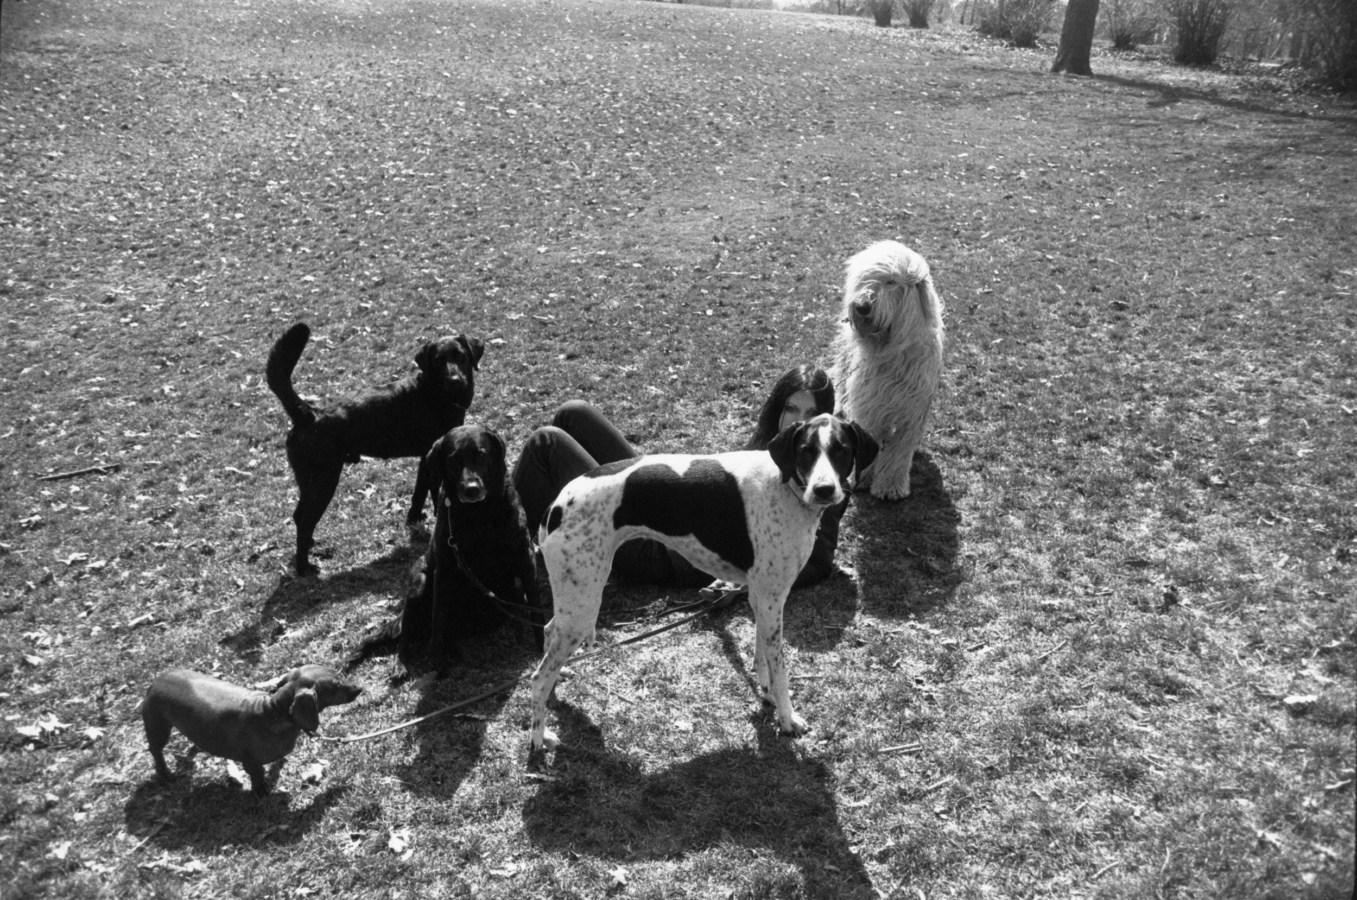 Black and white photograph of a woman reclining on a lawn with a group of dogs surrounding her